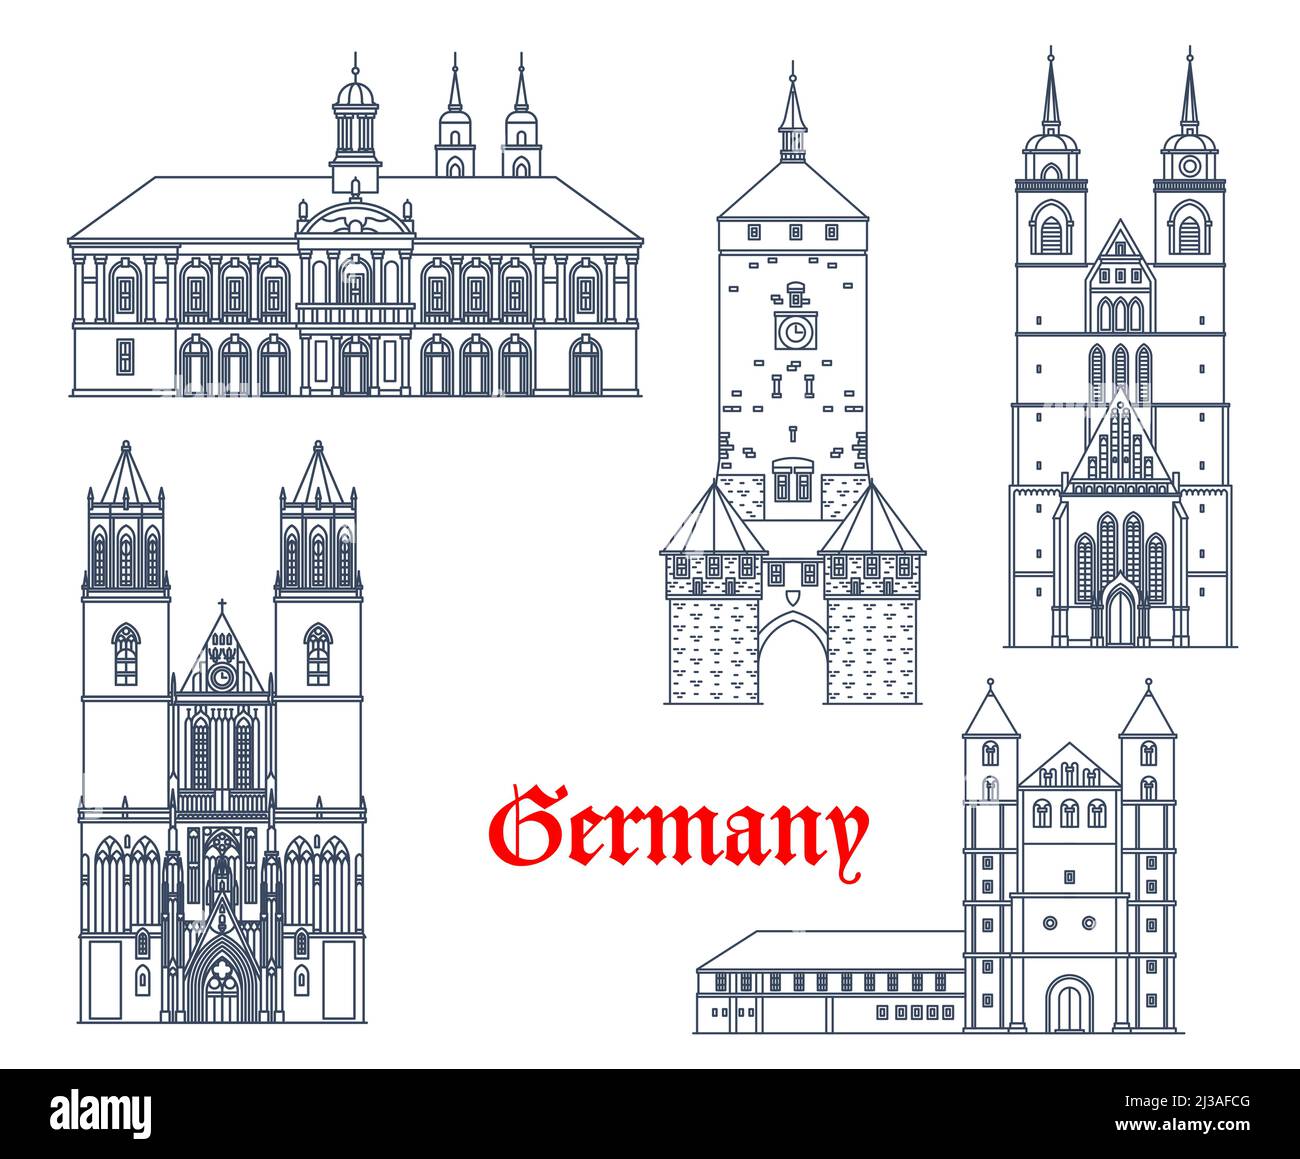 Germany architecture buildings of Magdeburg, Naumburg, vector cathedrals. German landmarks of Marienkirche and Magdeburg rathaus town hall with St Mauritius and Katharina cathedral dom Stock Vector